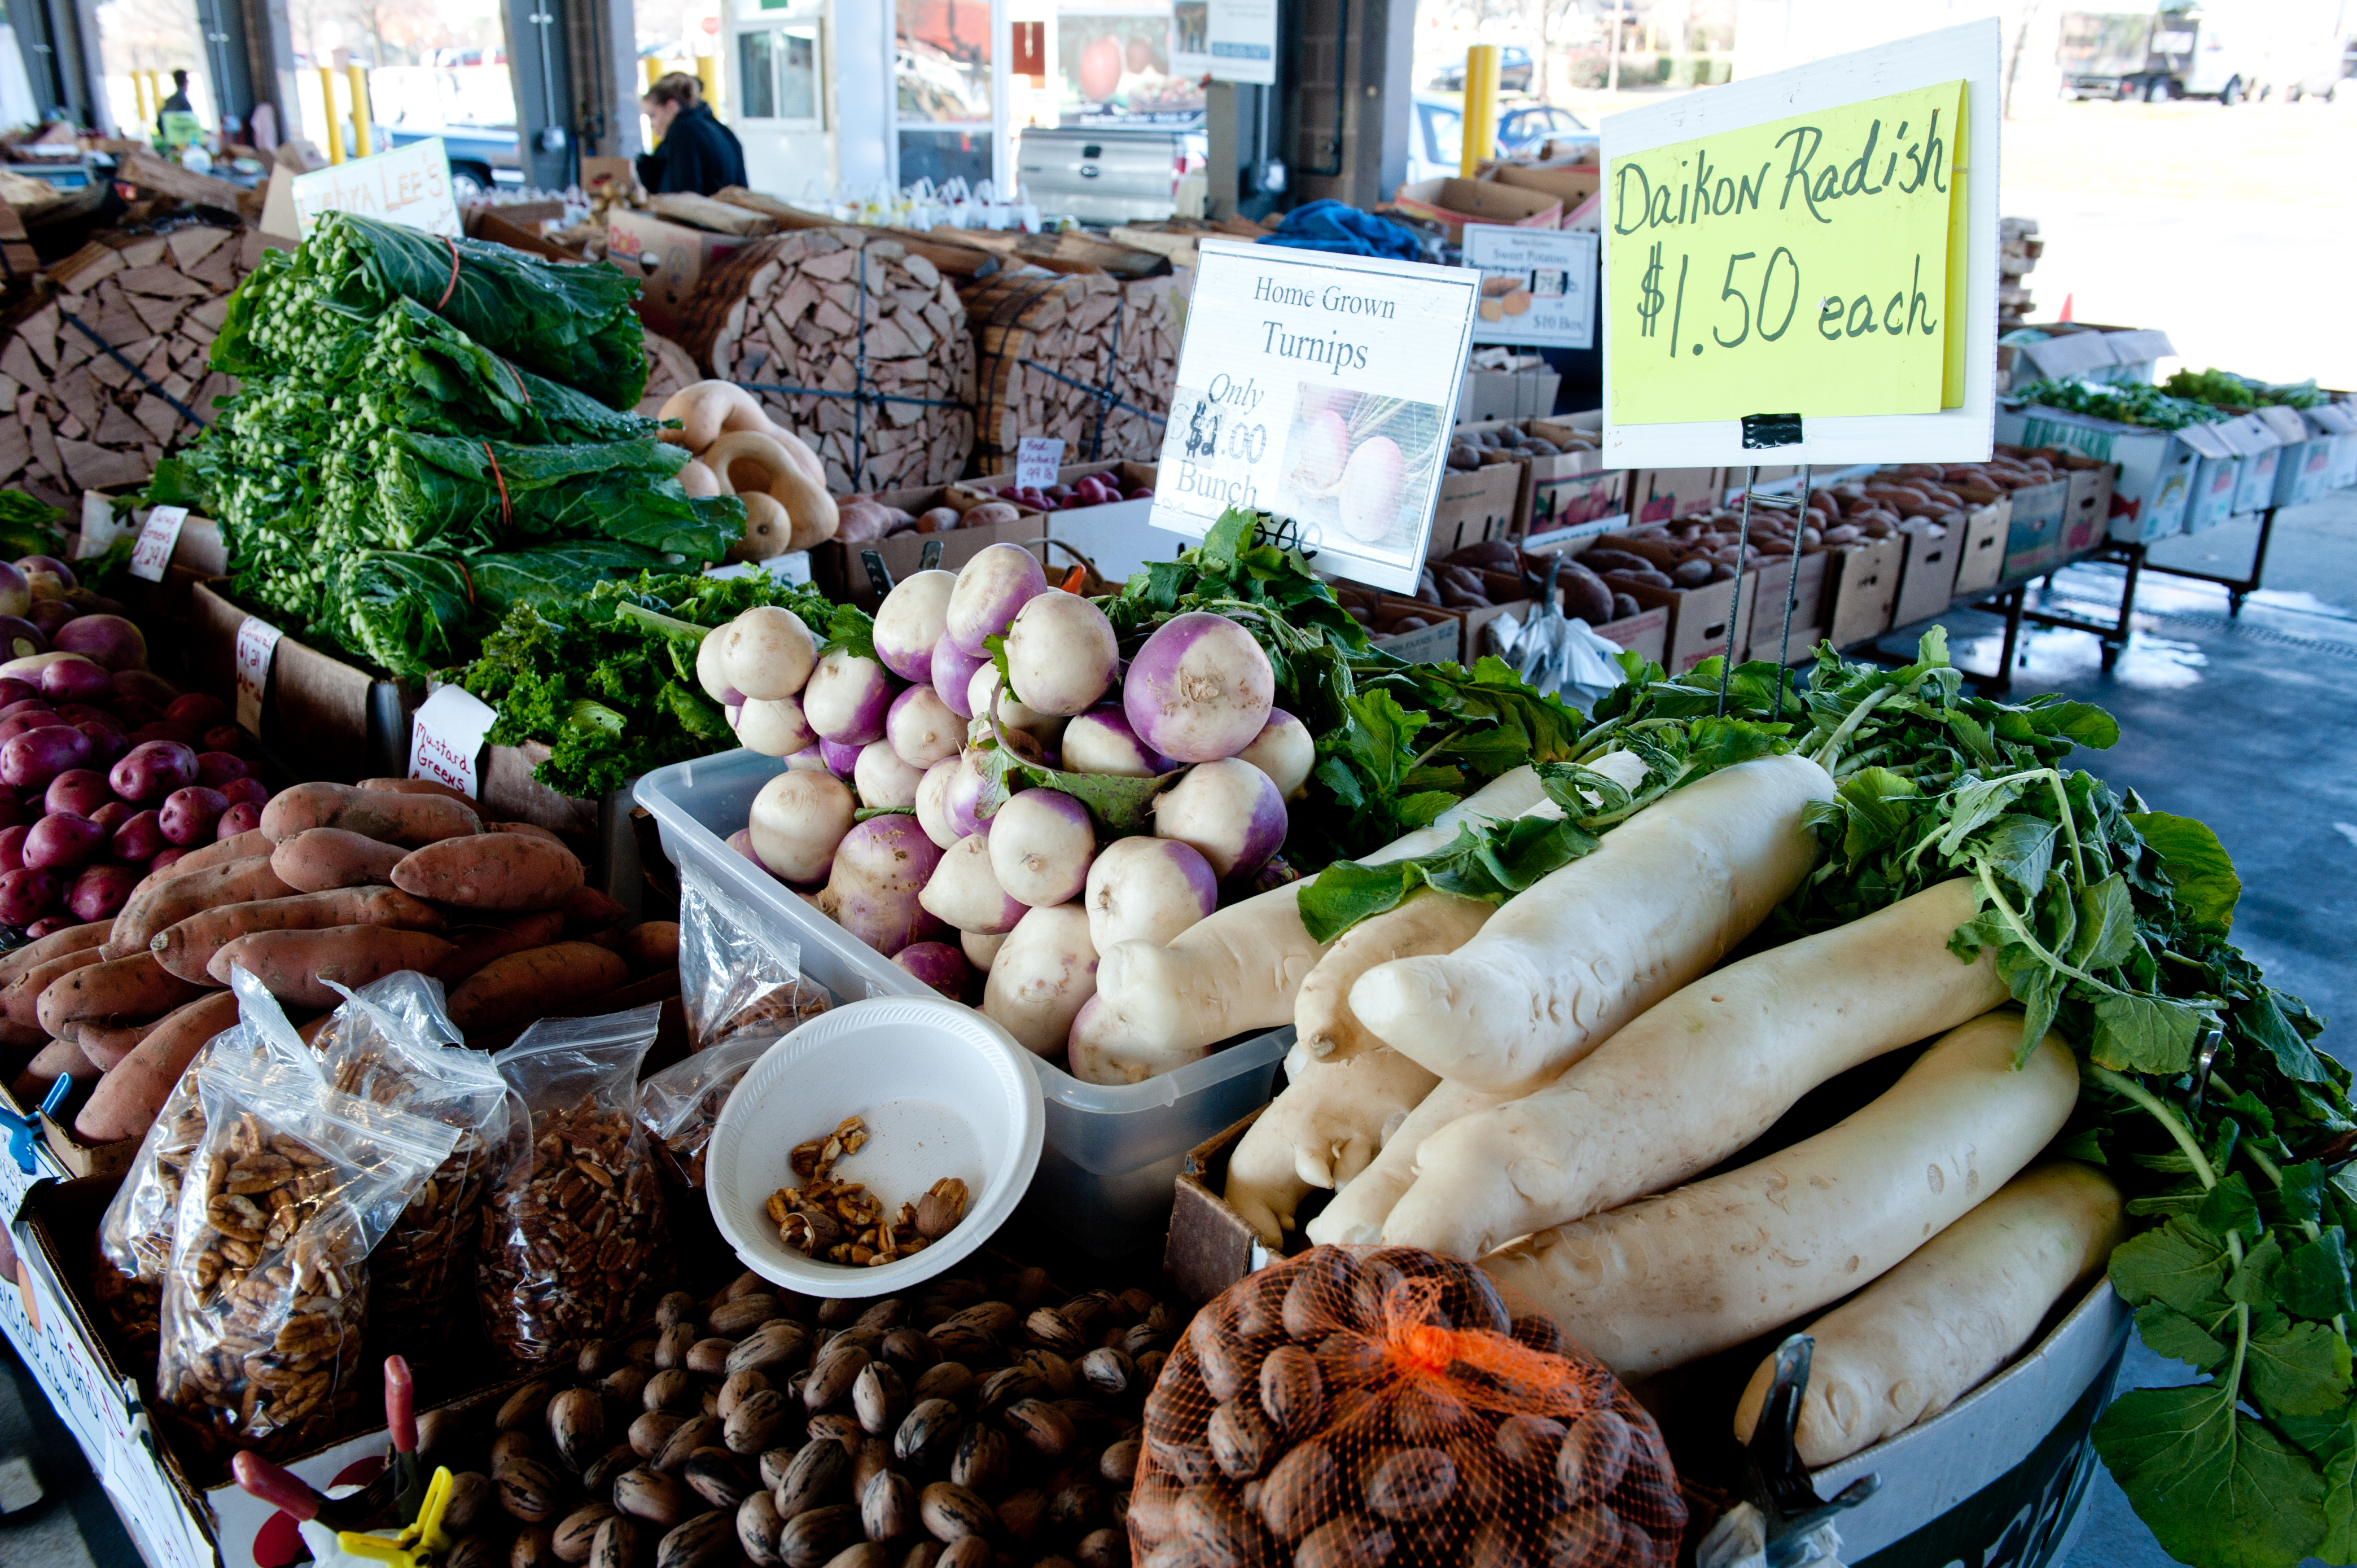 Farmers market stall with vegetables